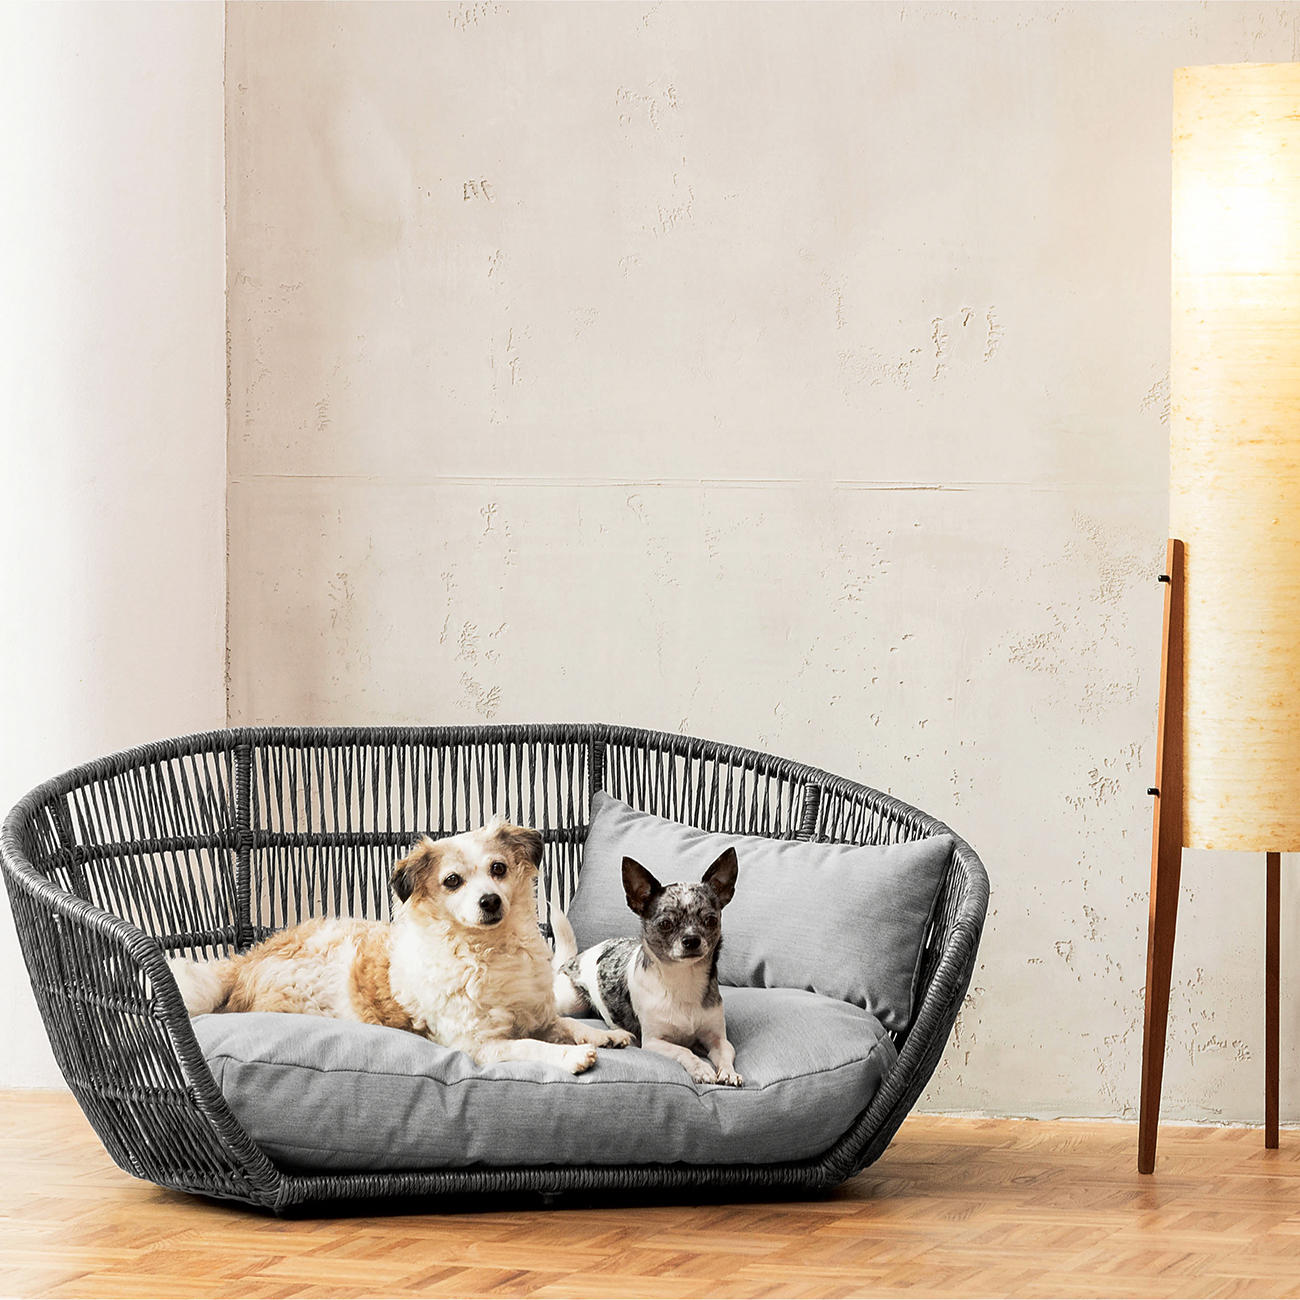 Design Dog Bed | 3-year product guarantee